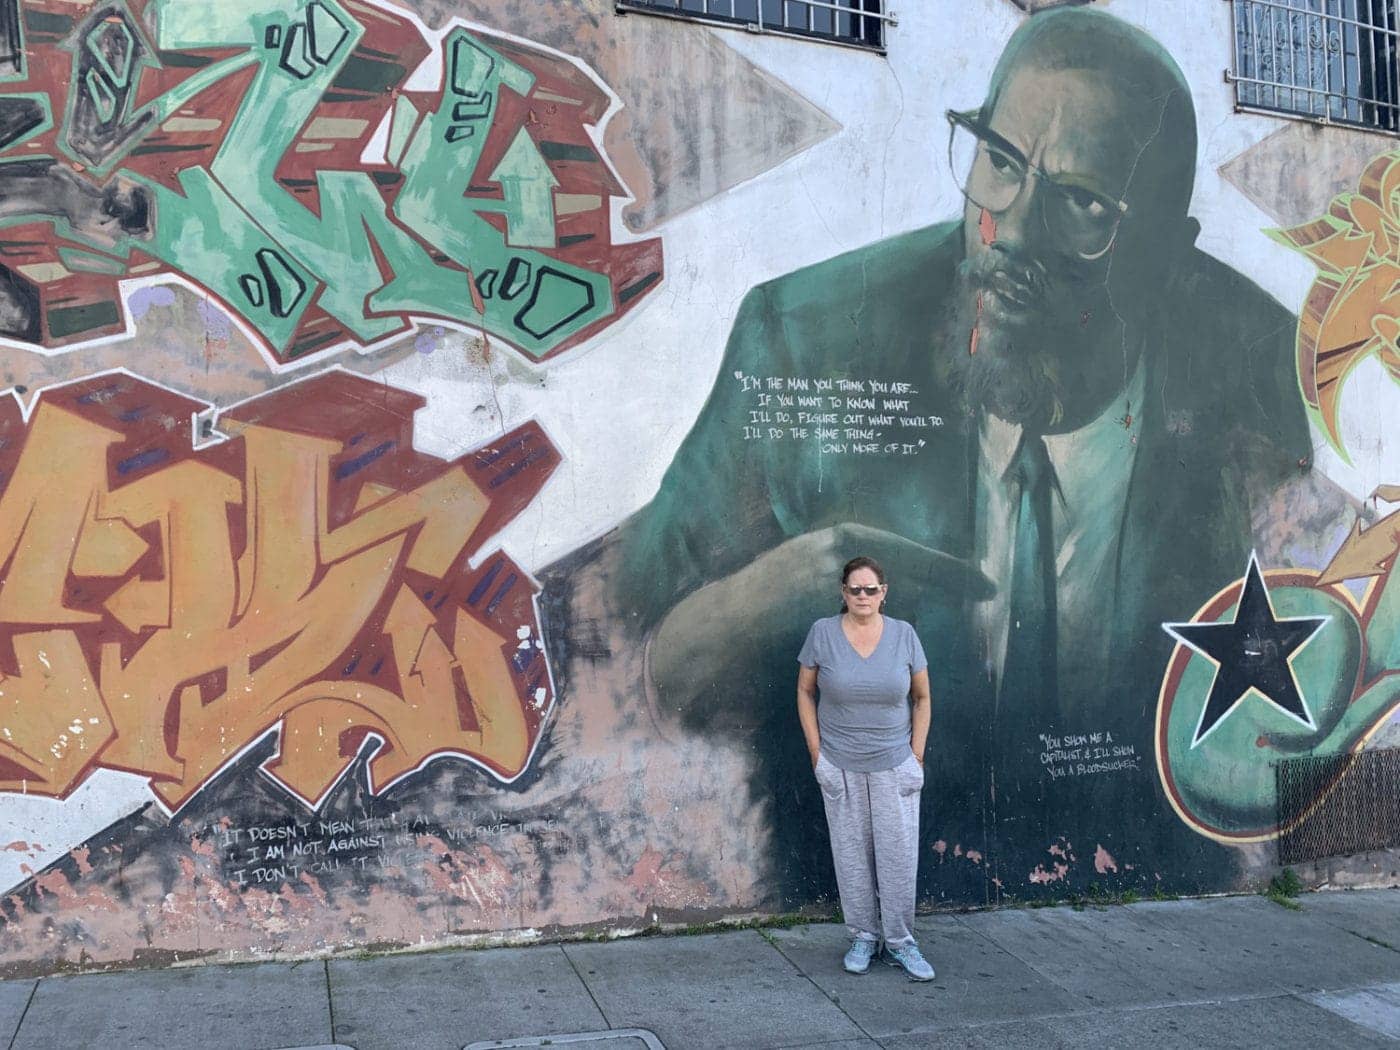 Kelly-at-the-Malcolm-X-mural-Bayview-SF-22022-1400x1050, T.H.U.G L.I.F.E: From gangster to growth, Behind Enemy Lines 